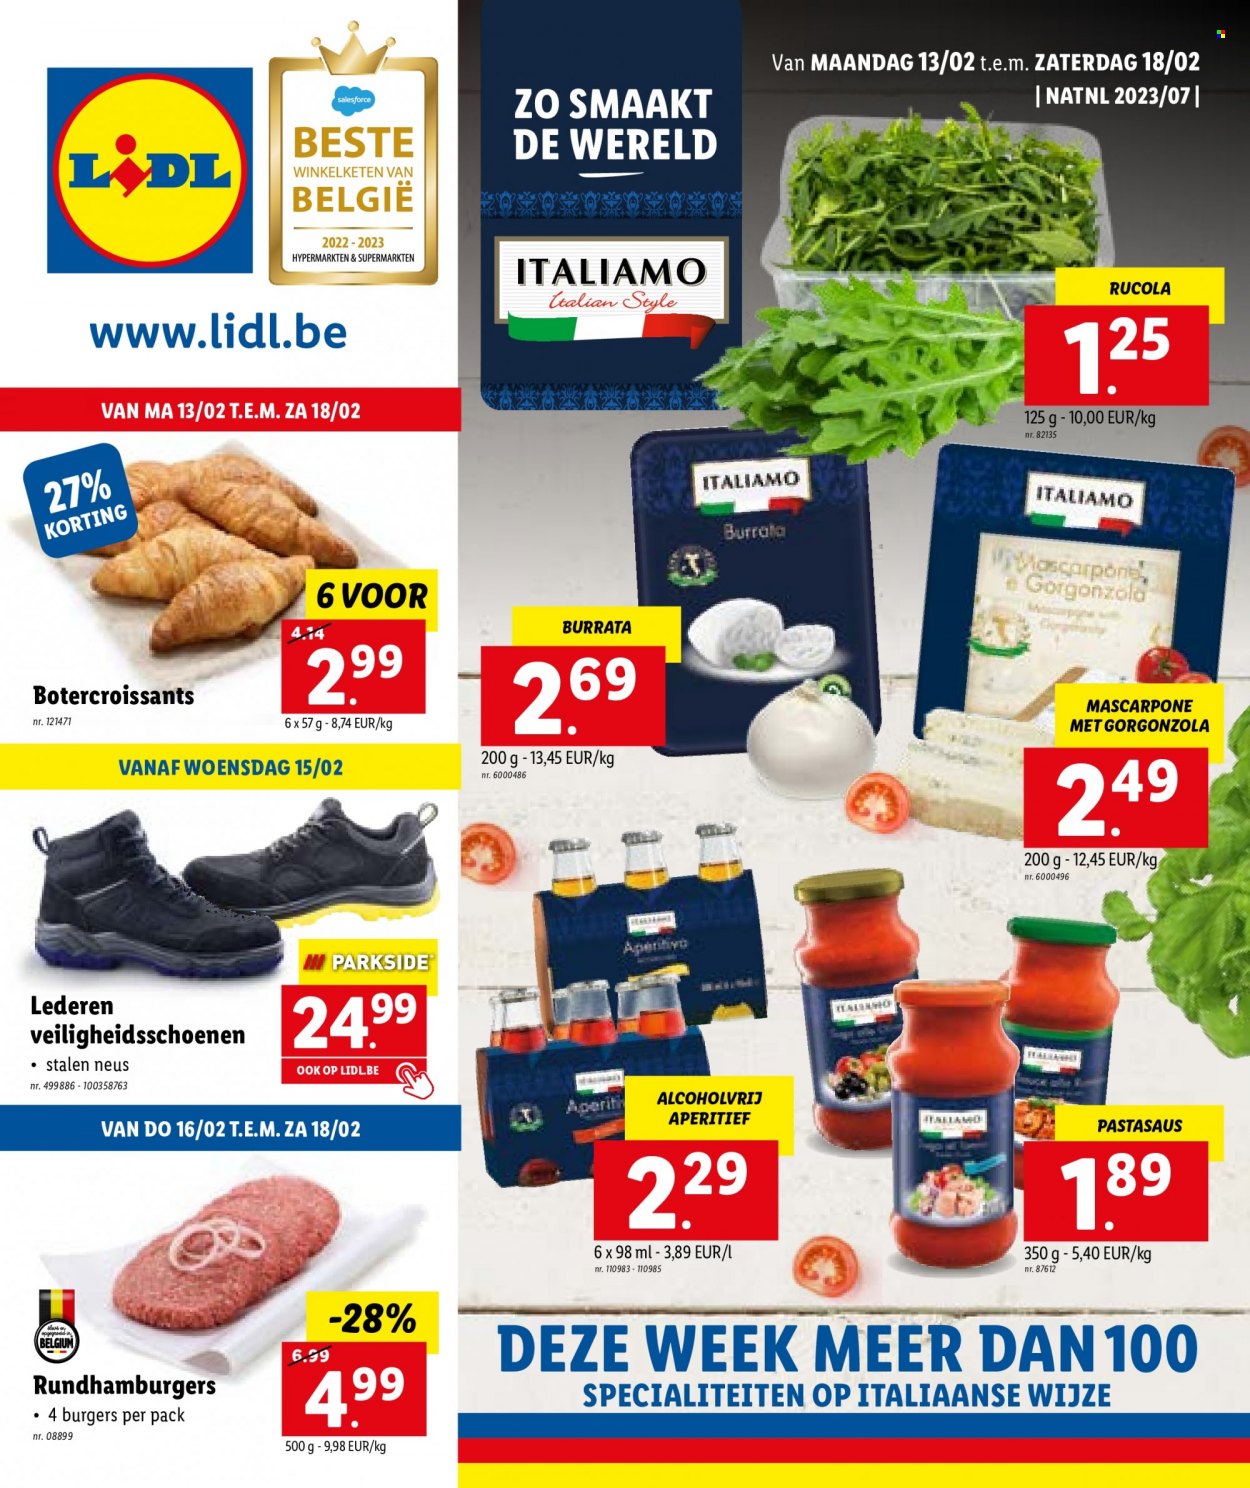 Catalogue Lidl - 13.2.2023 - 18.2.2023. Page 1.